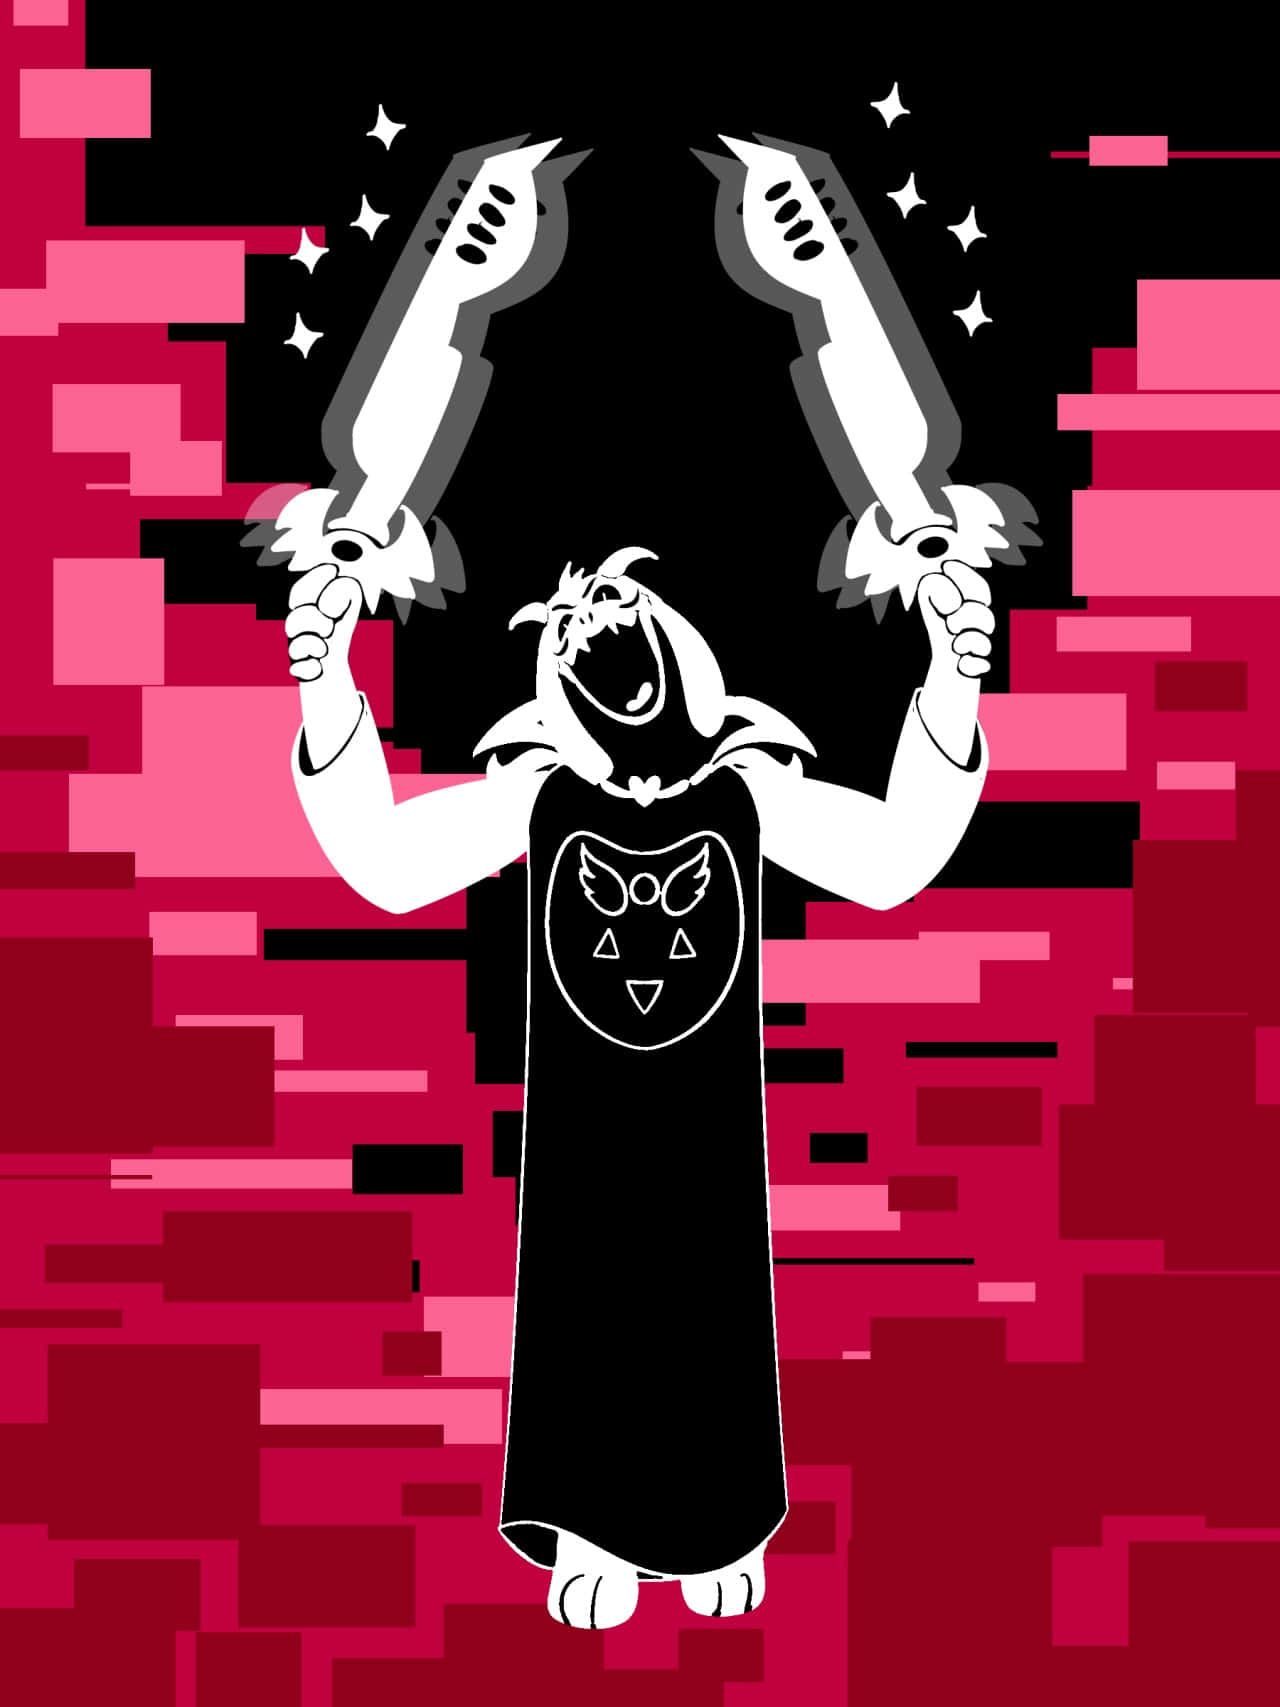 Ring in the new year with the Undertale Phone Wallpaper